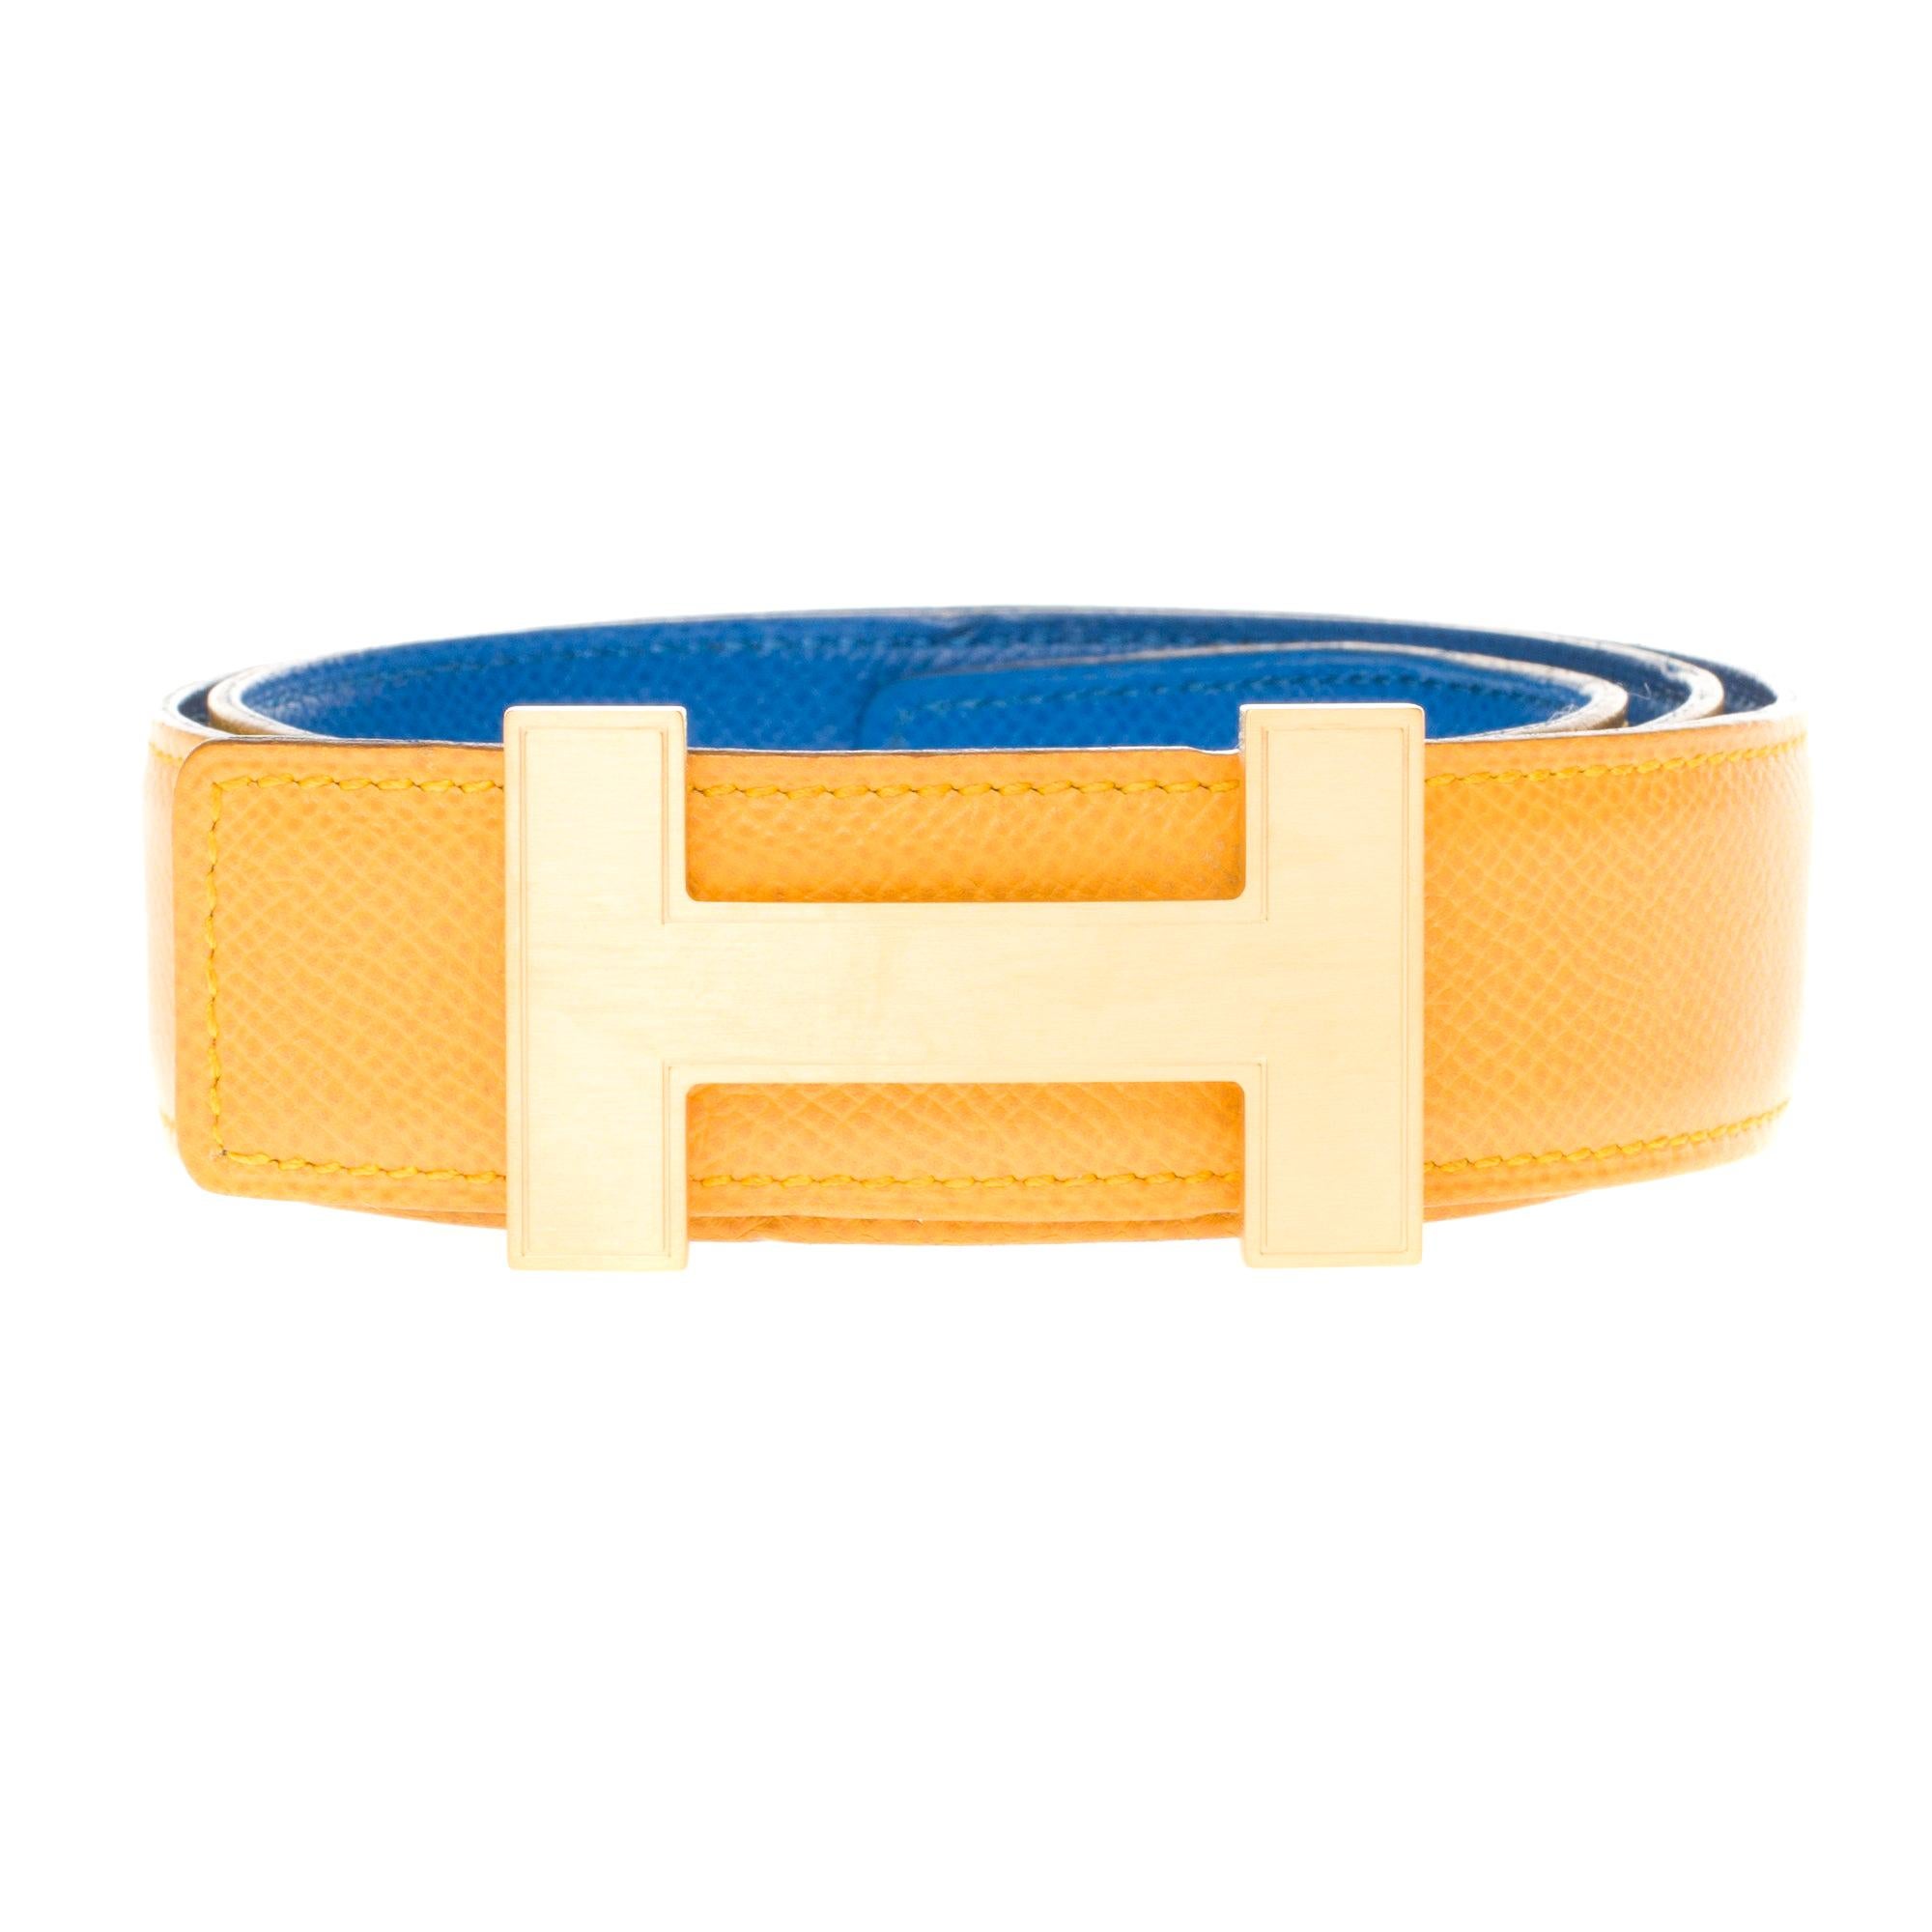 Hermès Constance reversible belt in Yellow and blue epsom  leather, Quizz buckle